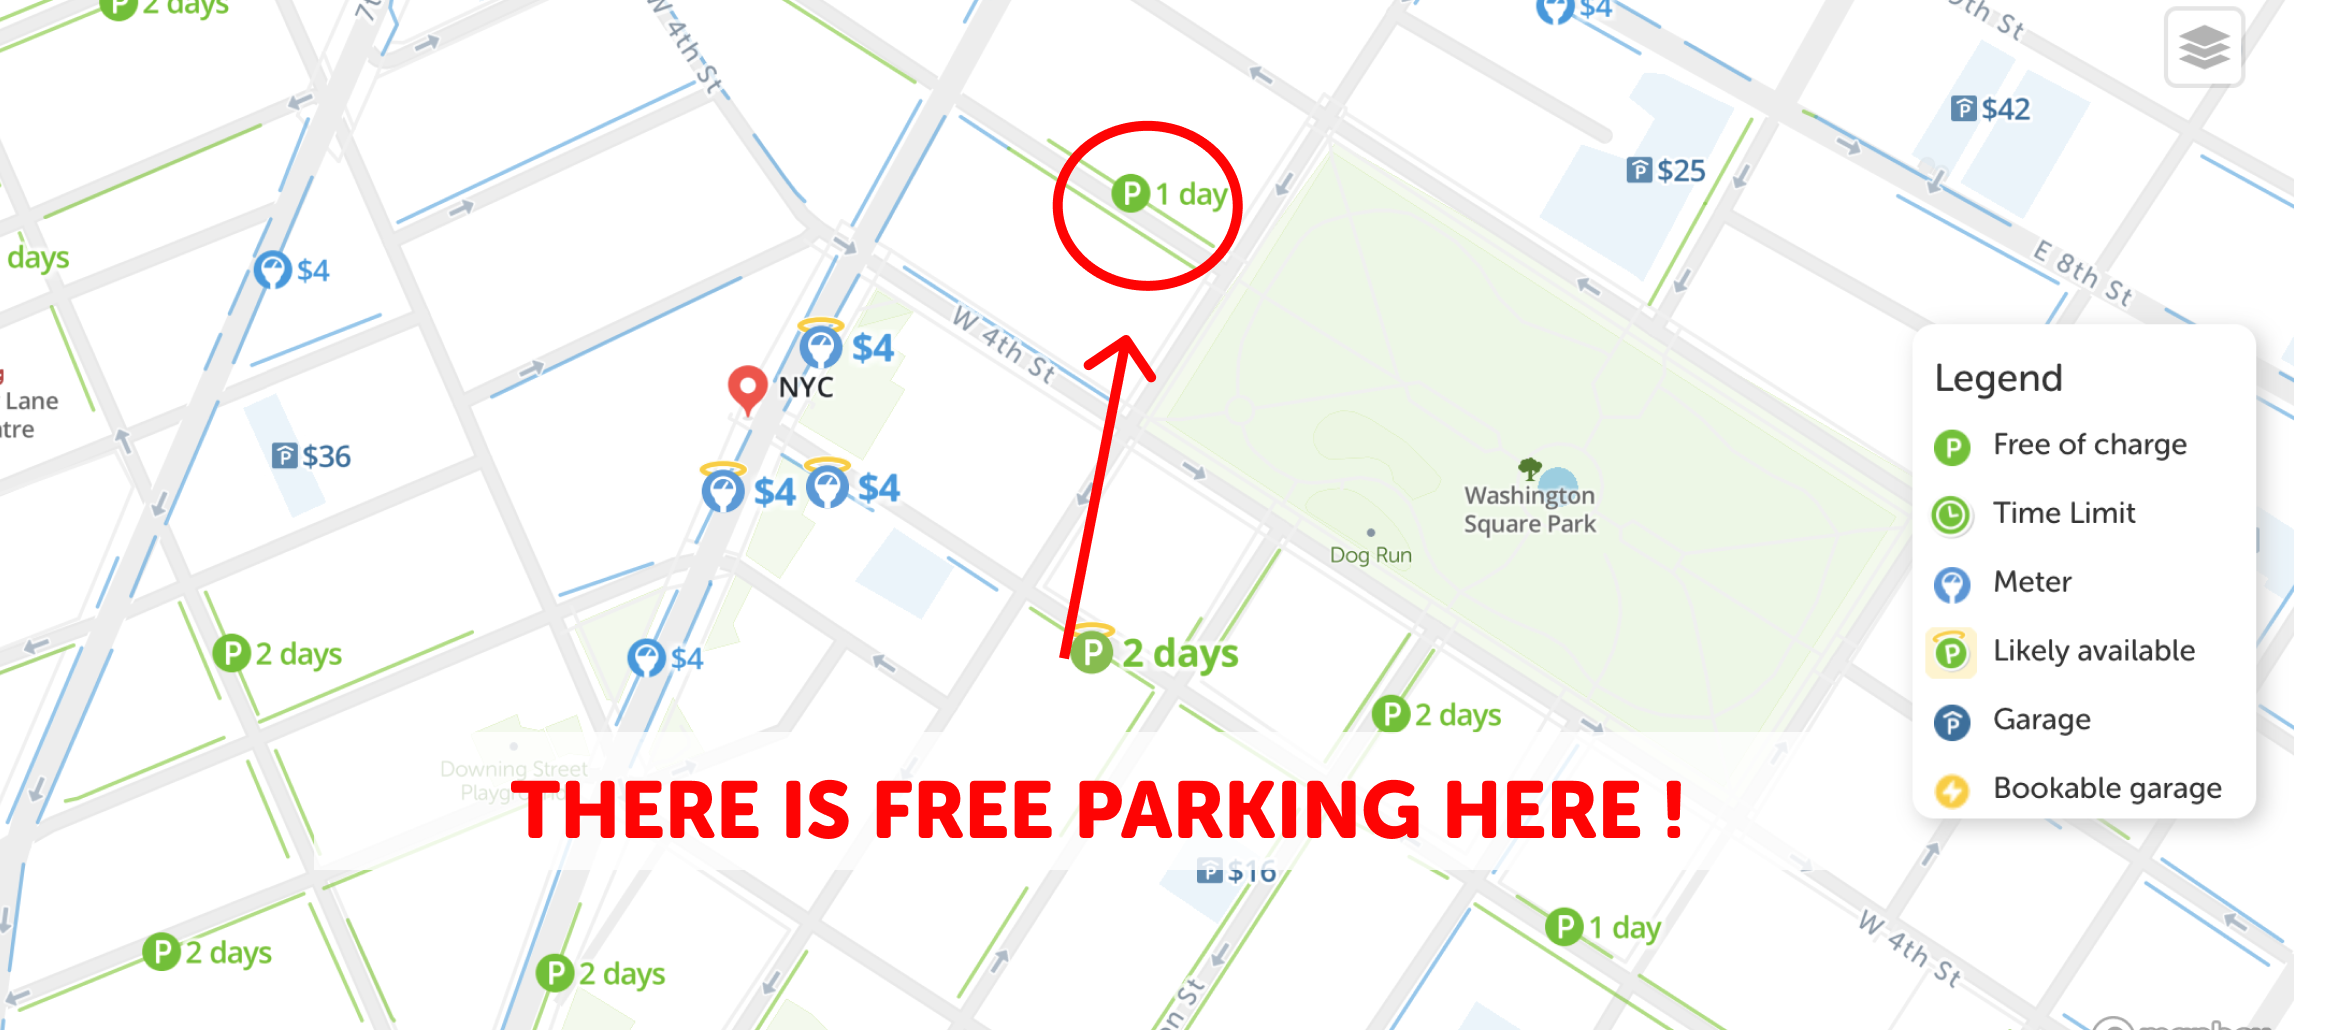 2020 Map Of Free Parking In New York City Spotangels